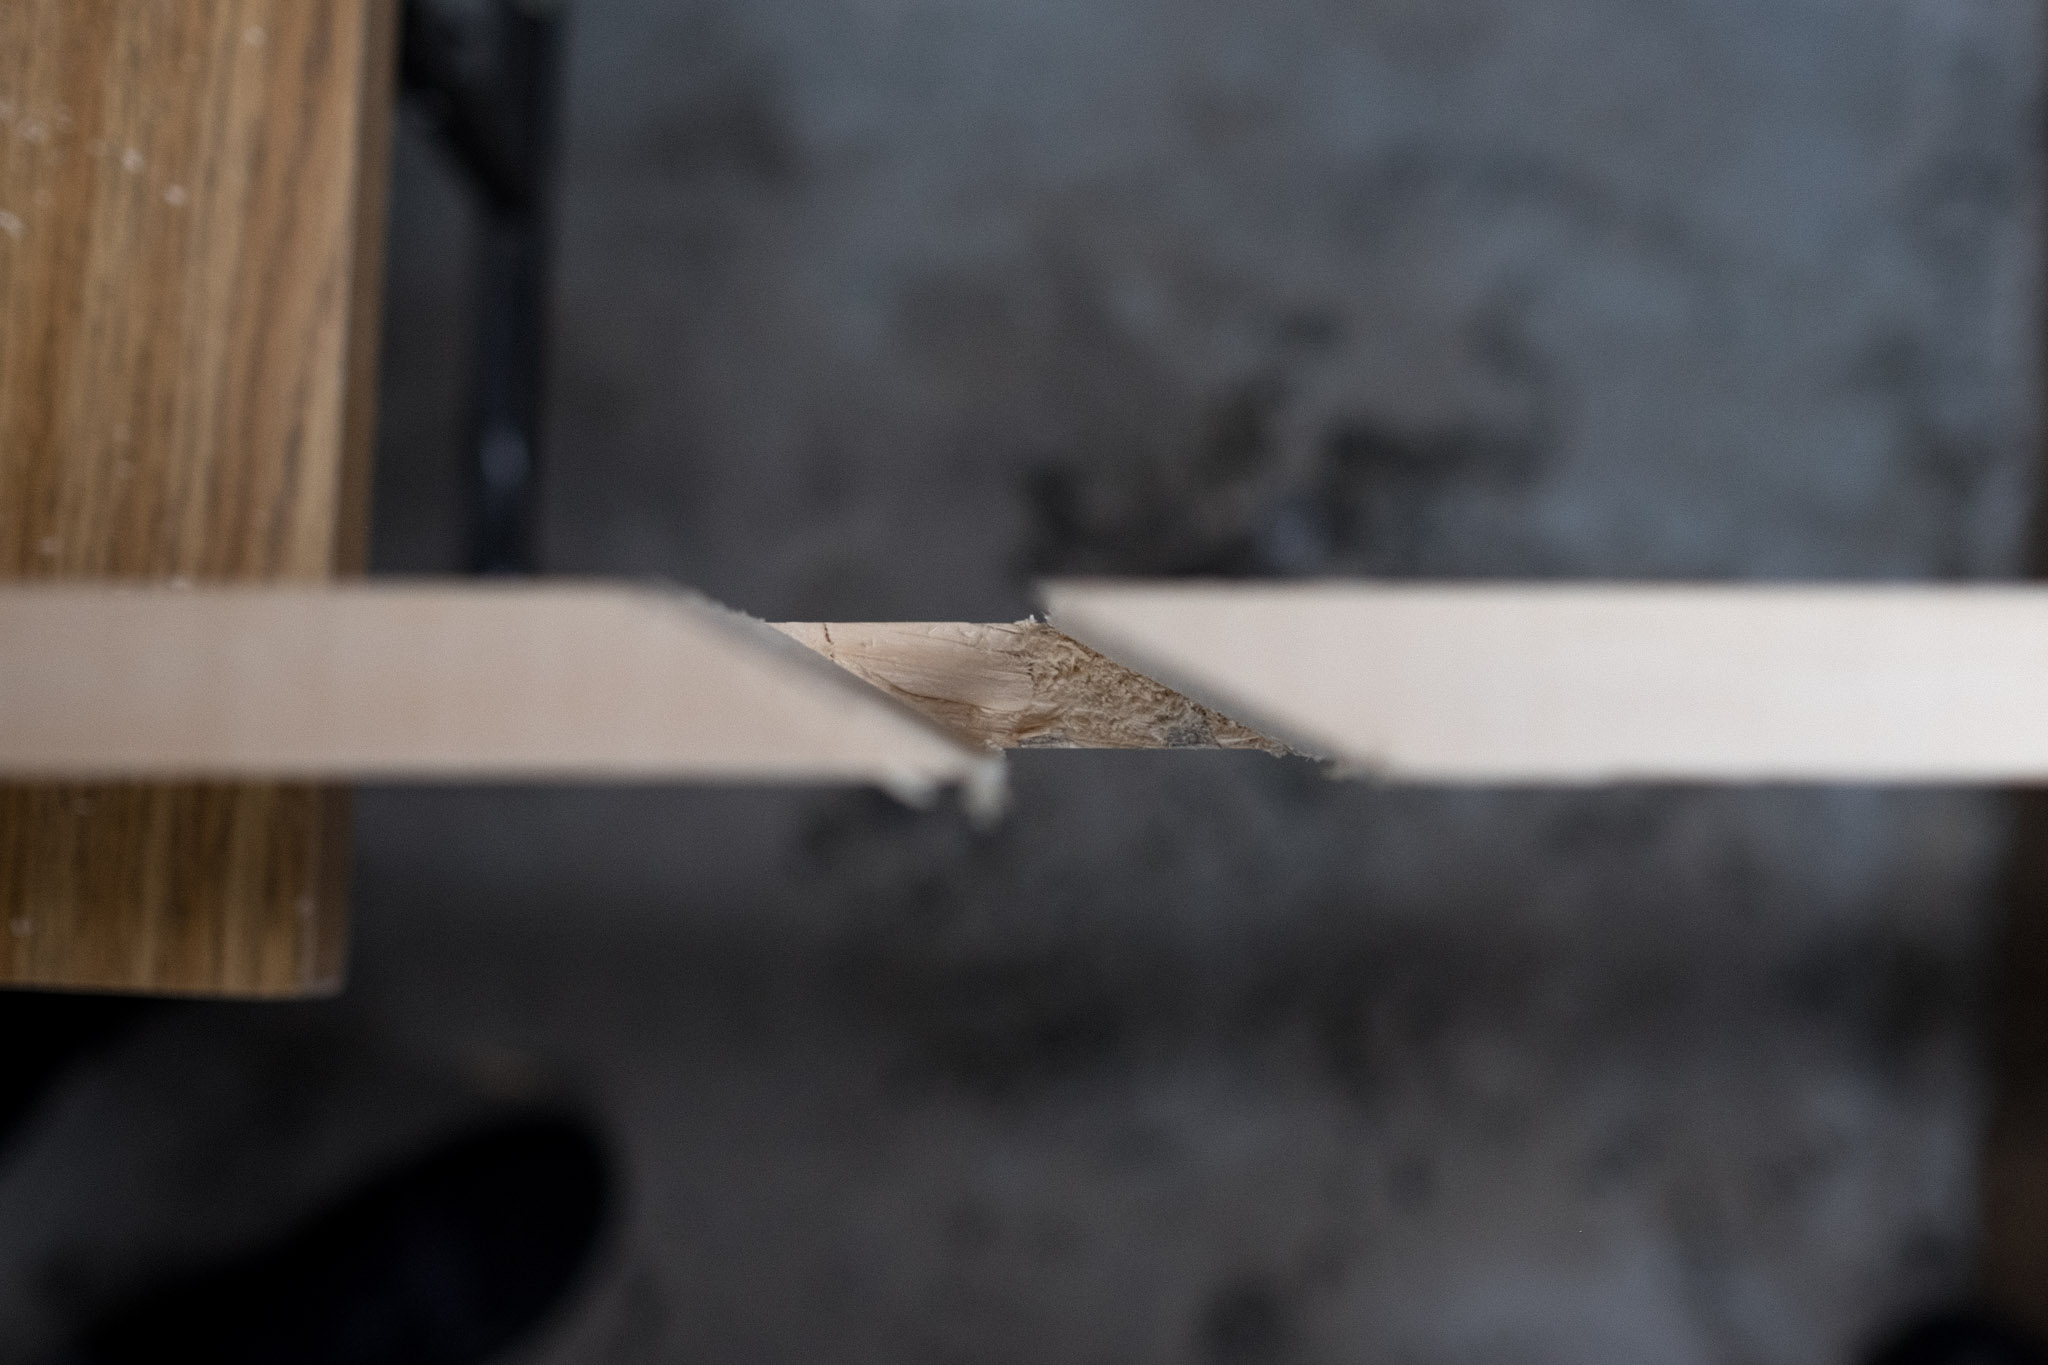 The process behind my minimal wood shelf project